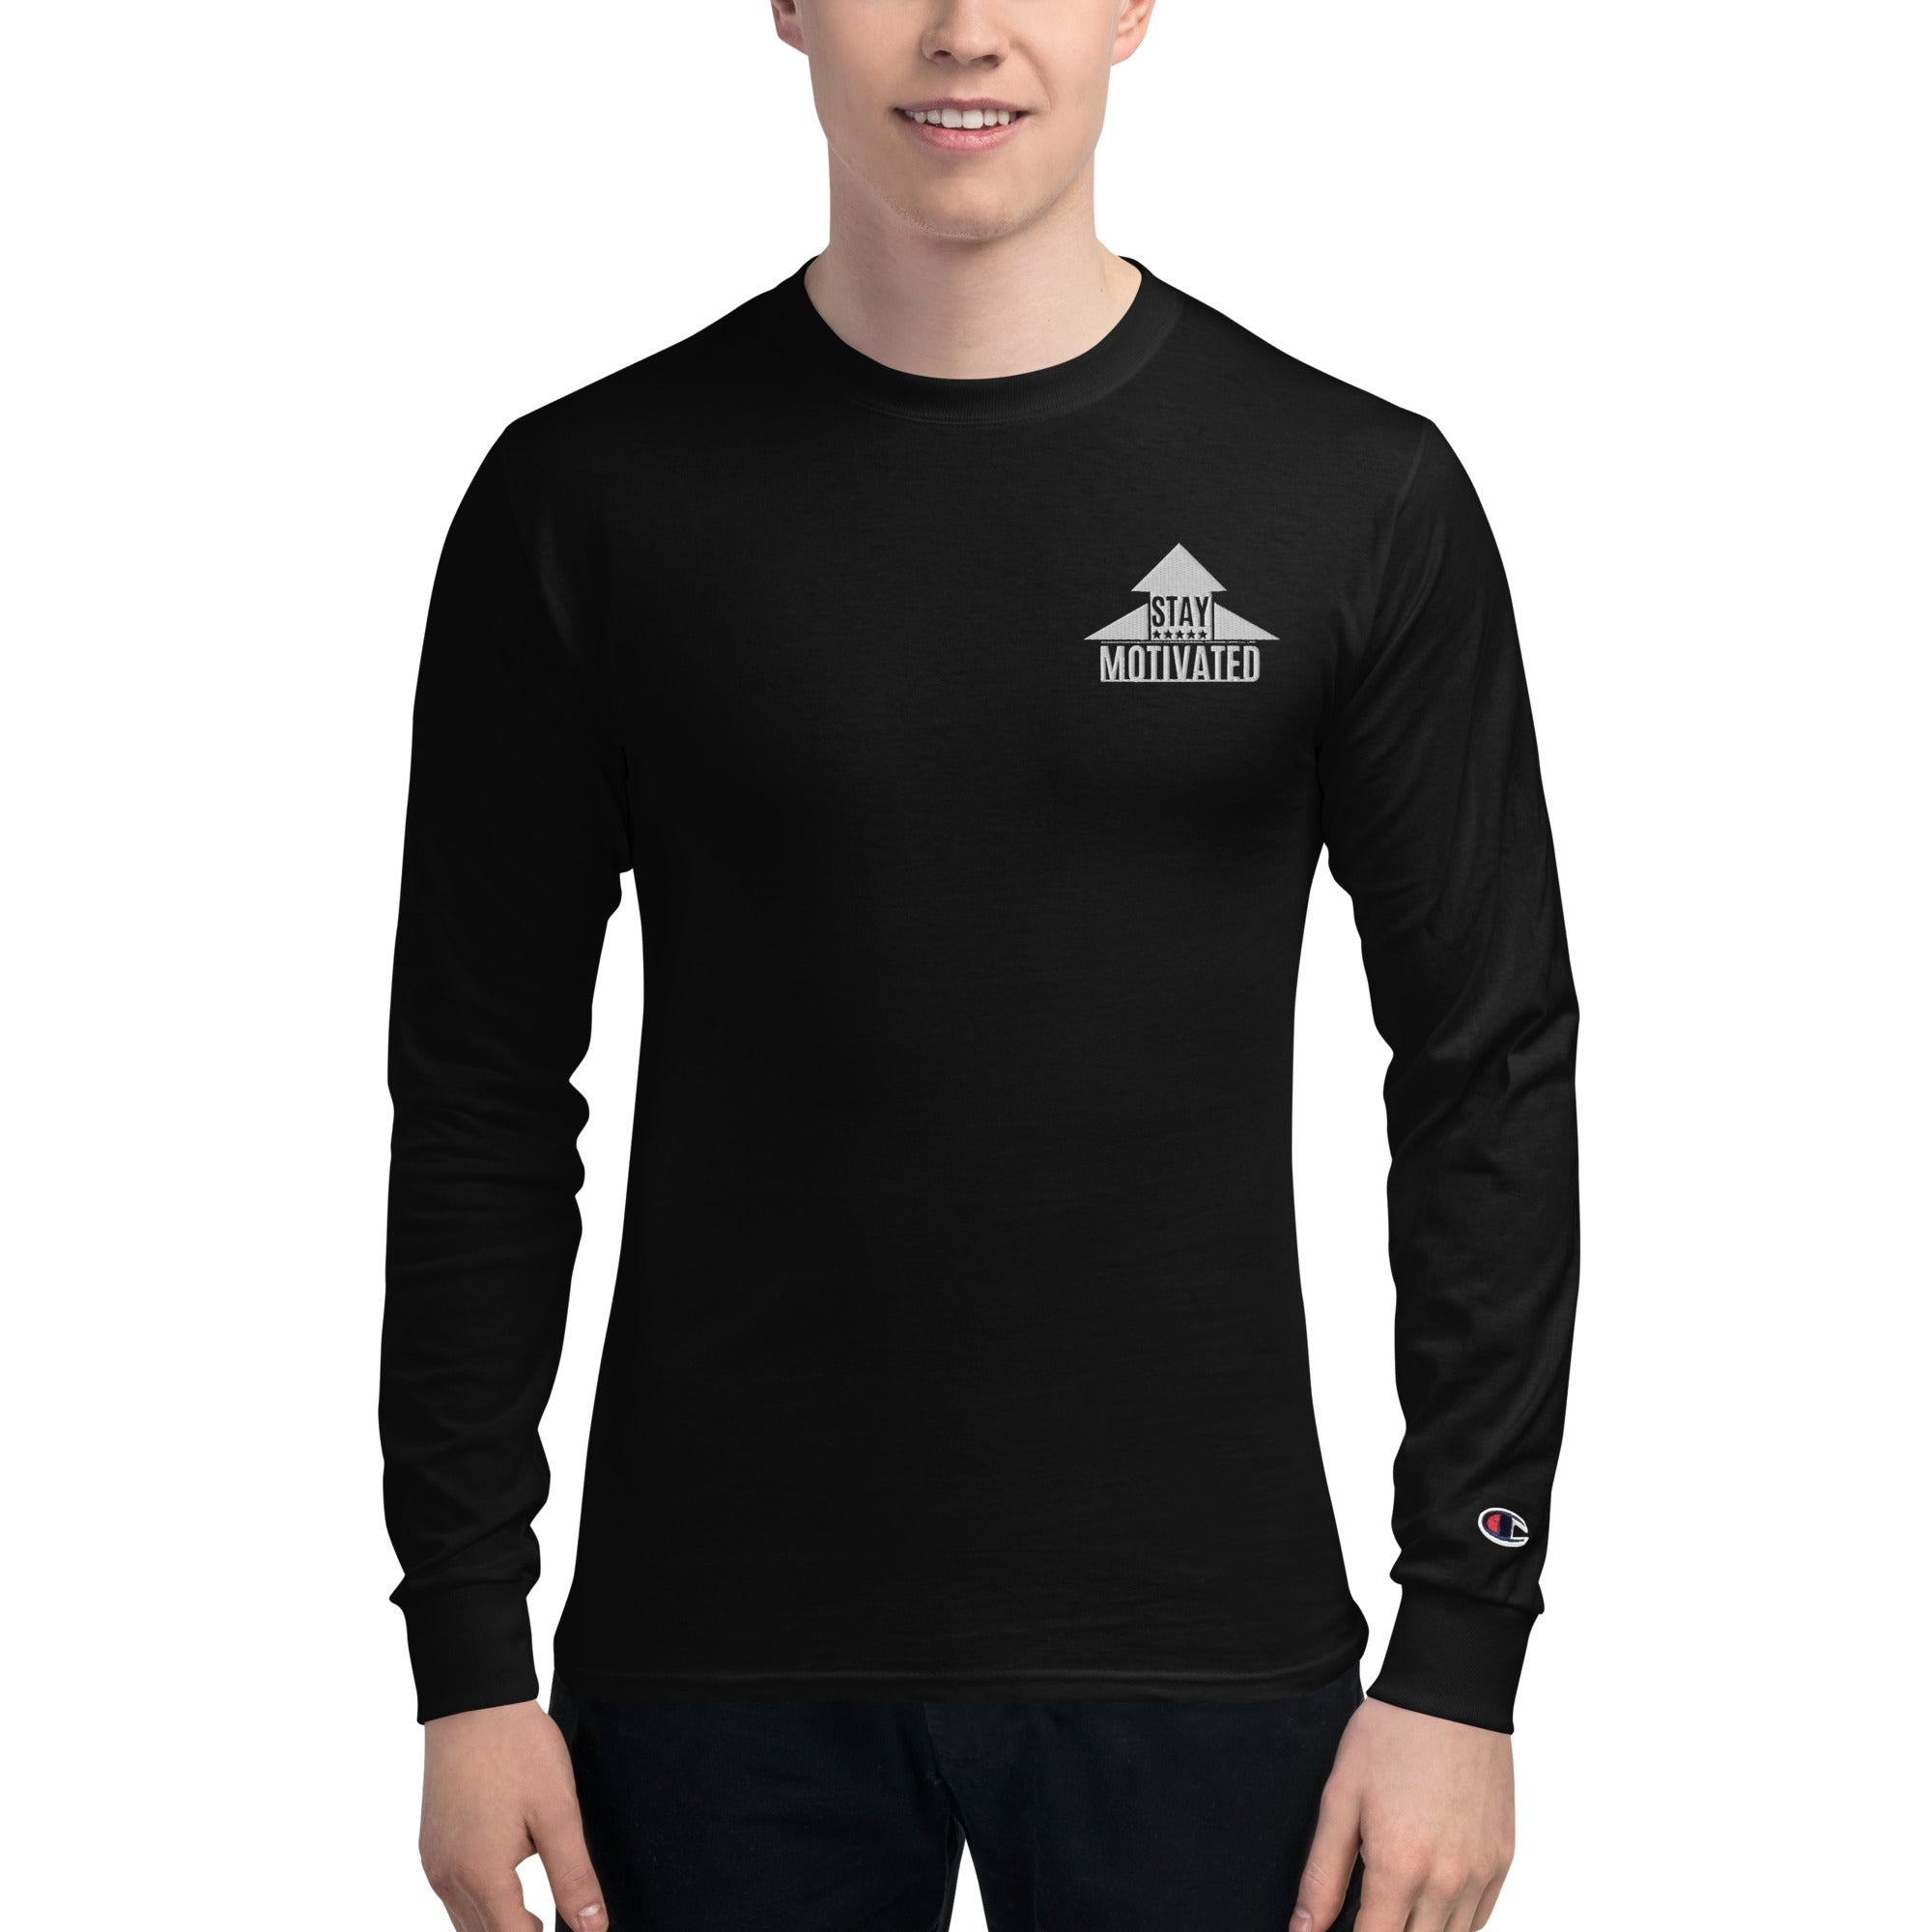 Stay Motivated Men's Champion Long Sleeve Shirt